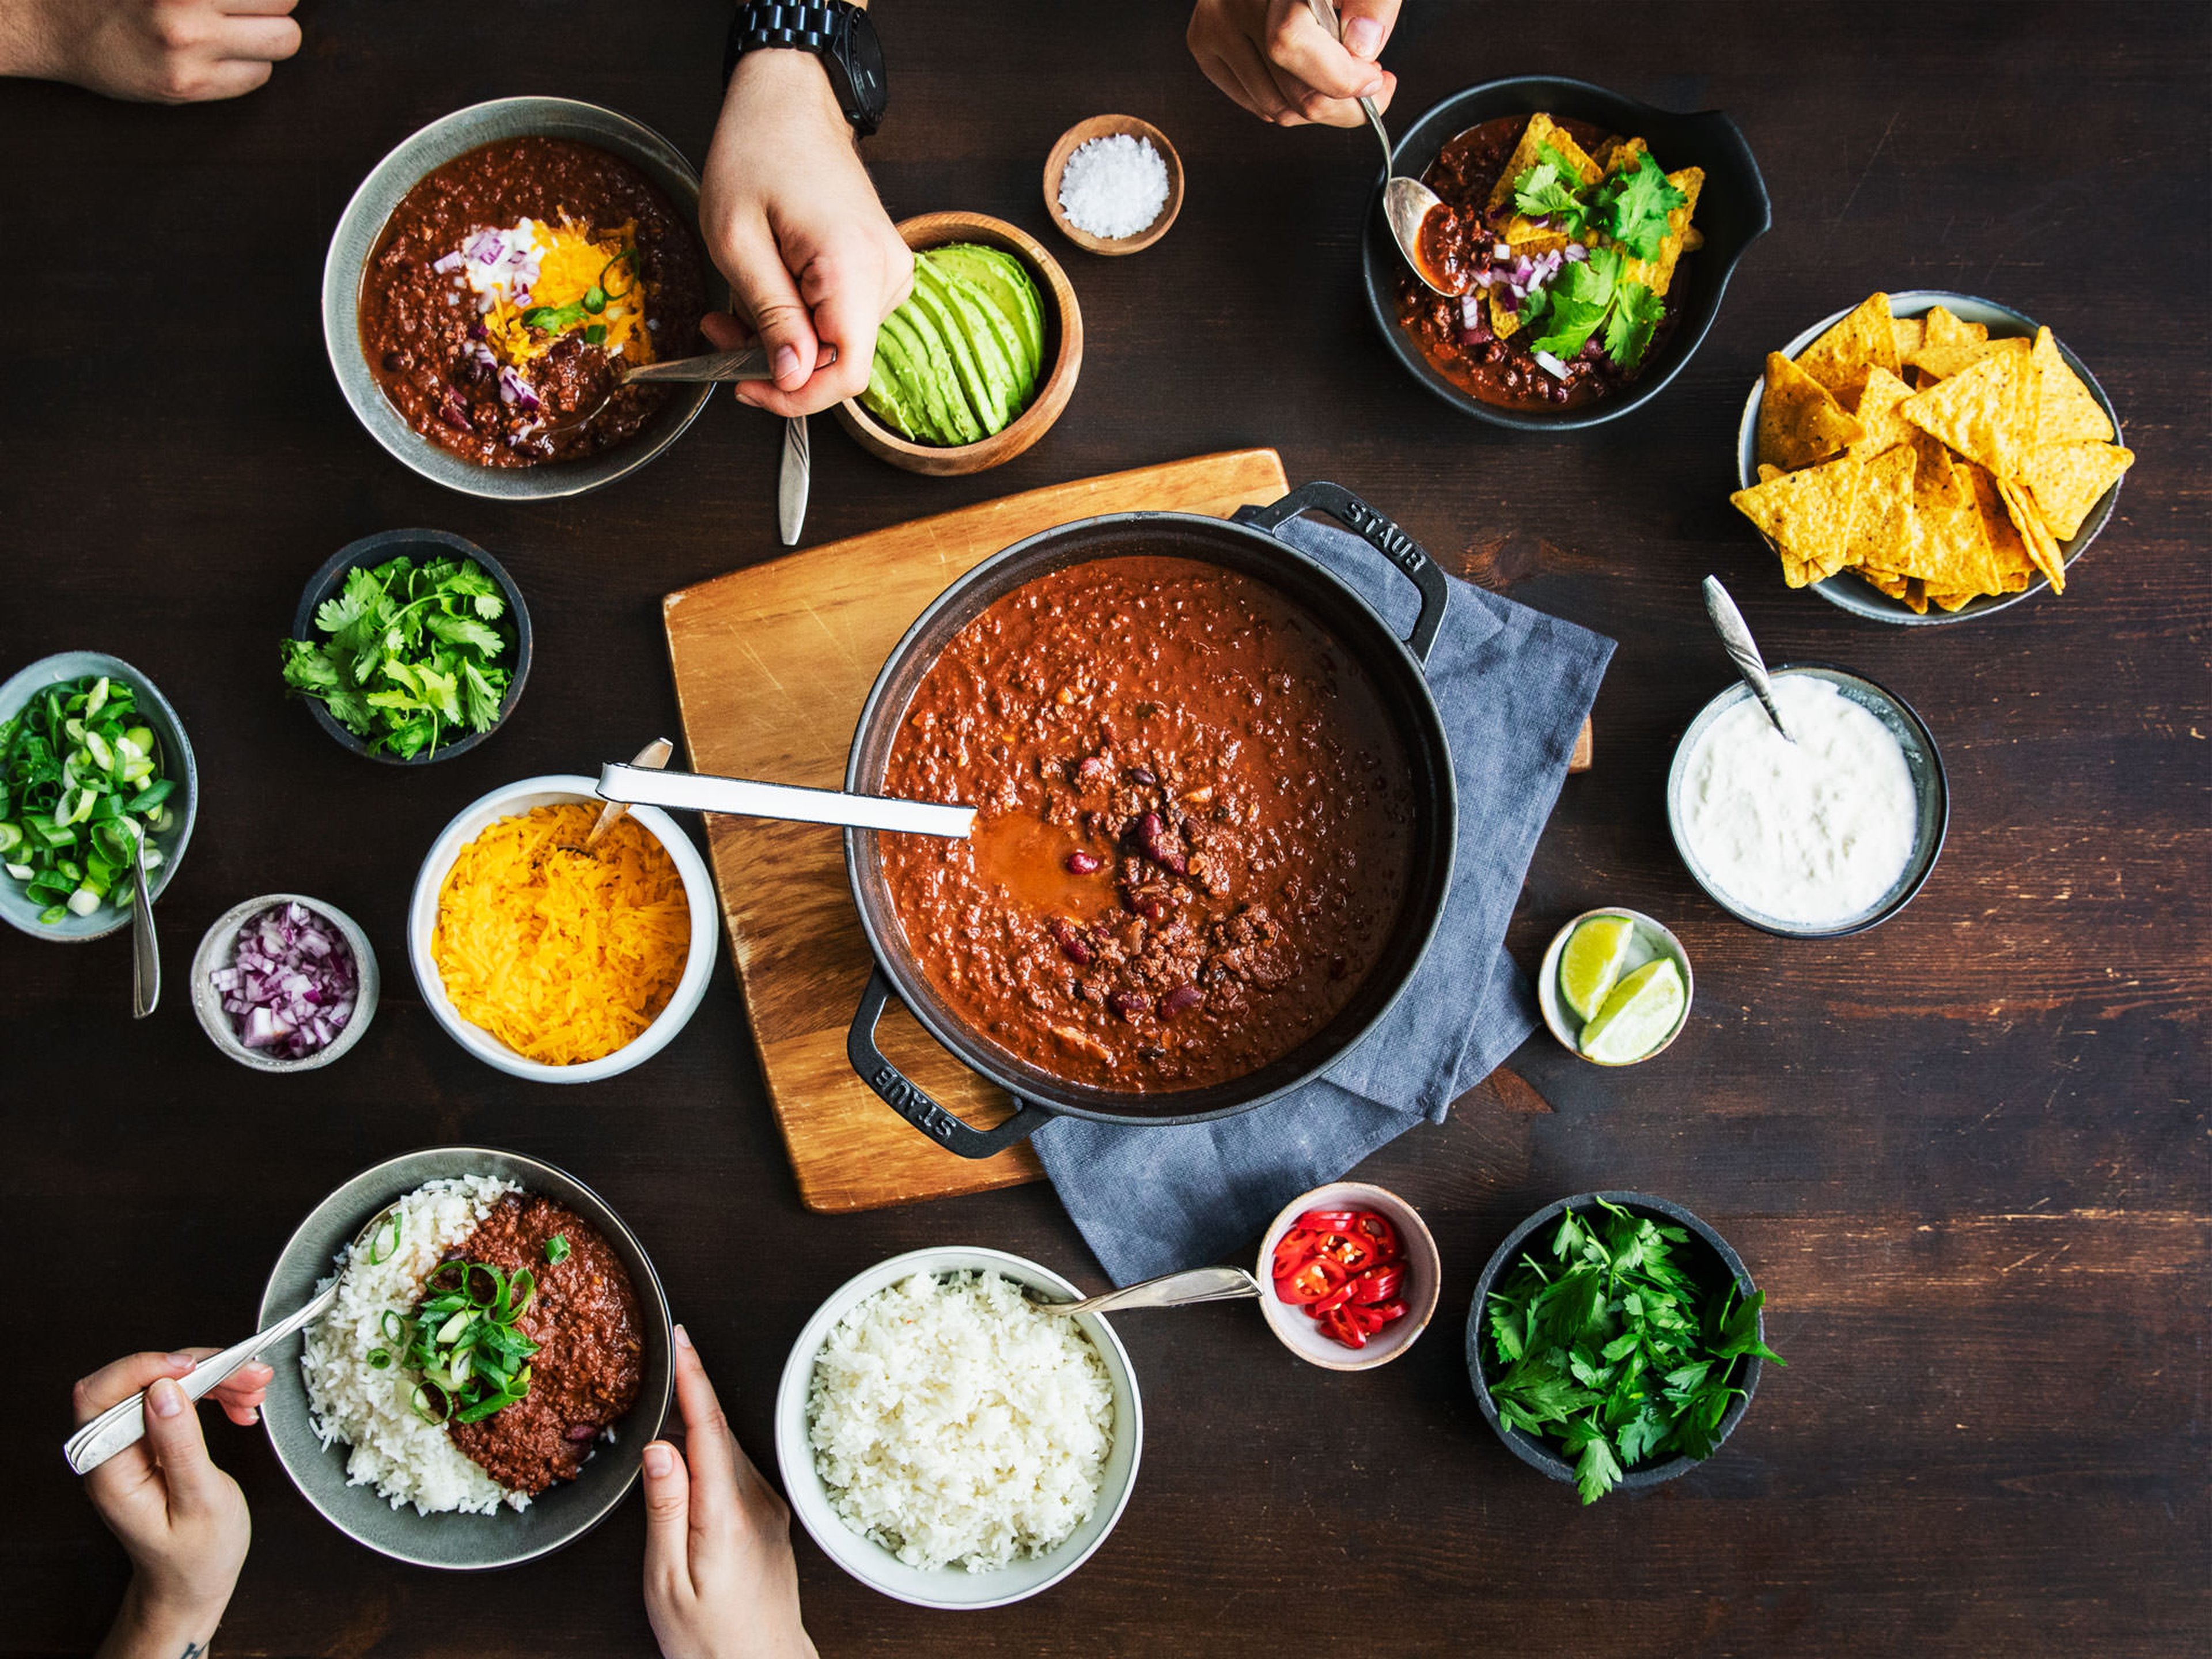 How to Make the Perfect Bowl of Chili